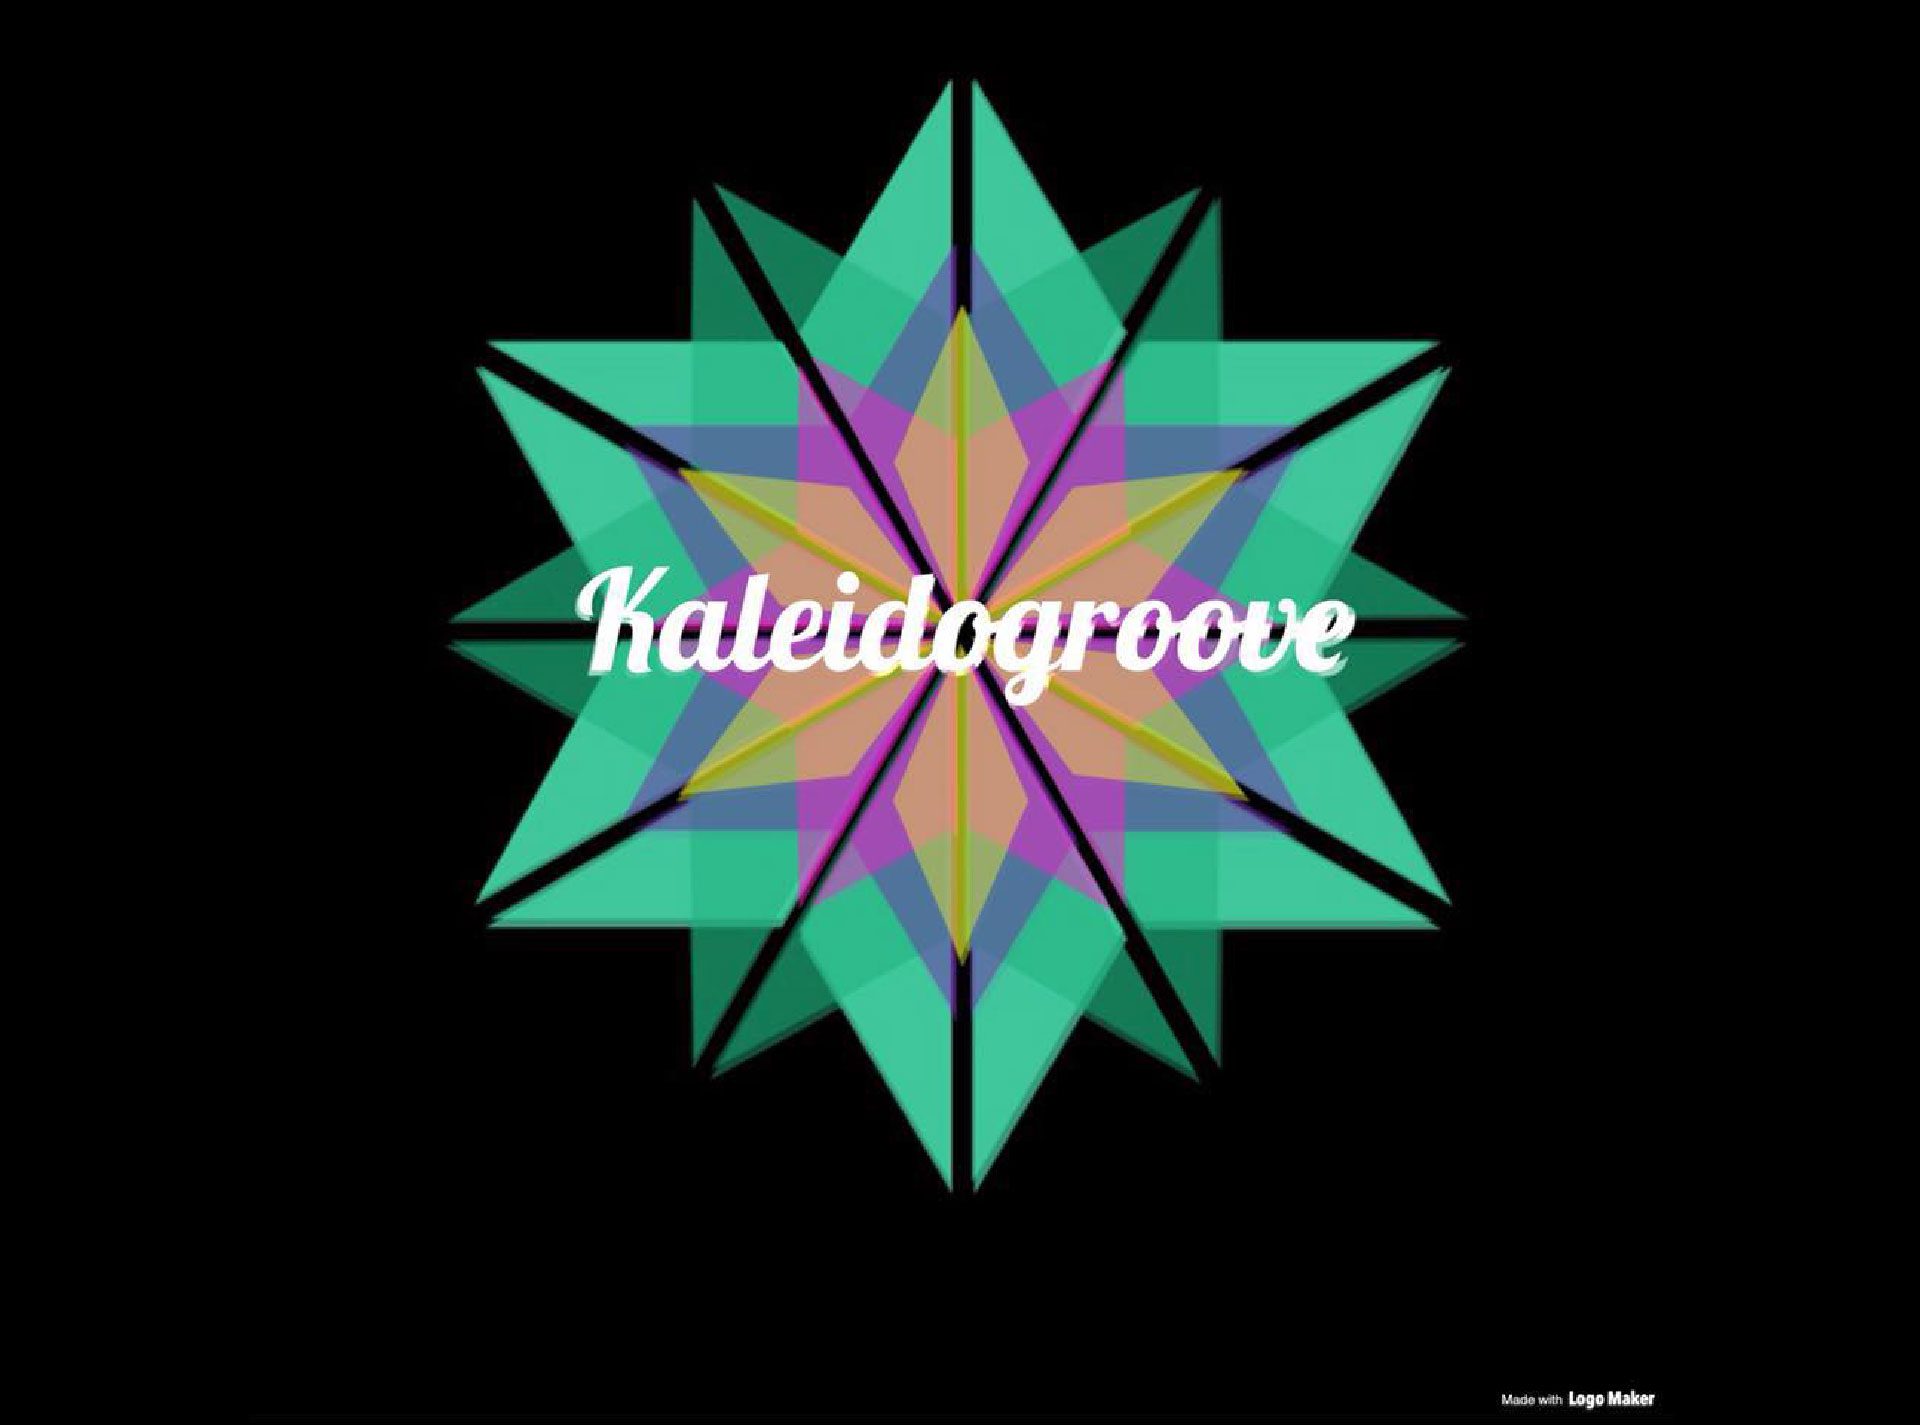 Motorworks Brewing presents Kaleidogroove Logo with psychedelic background